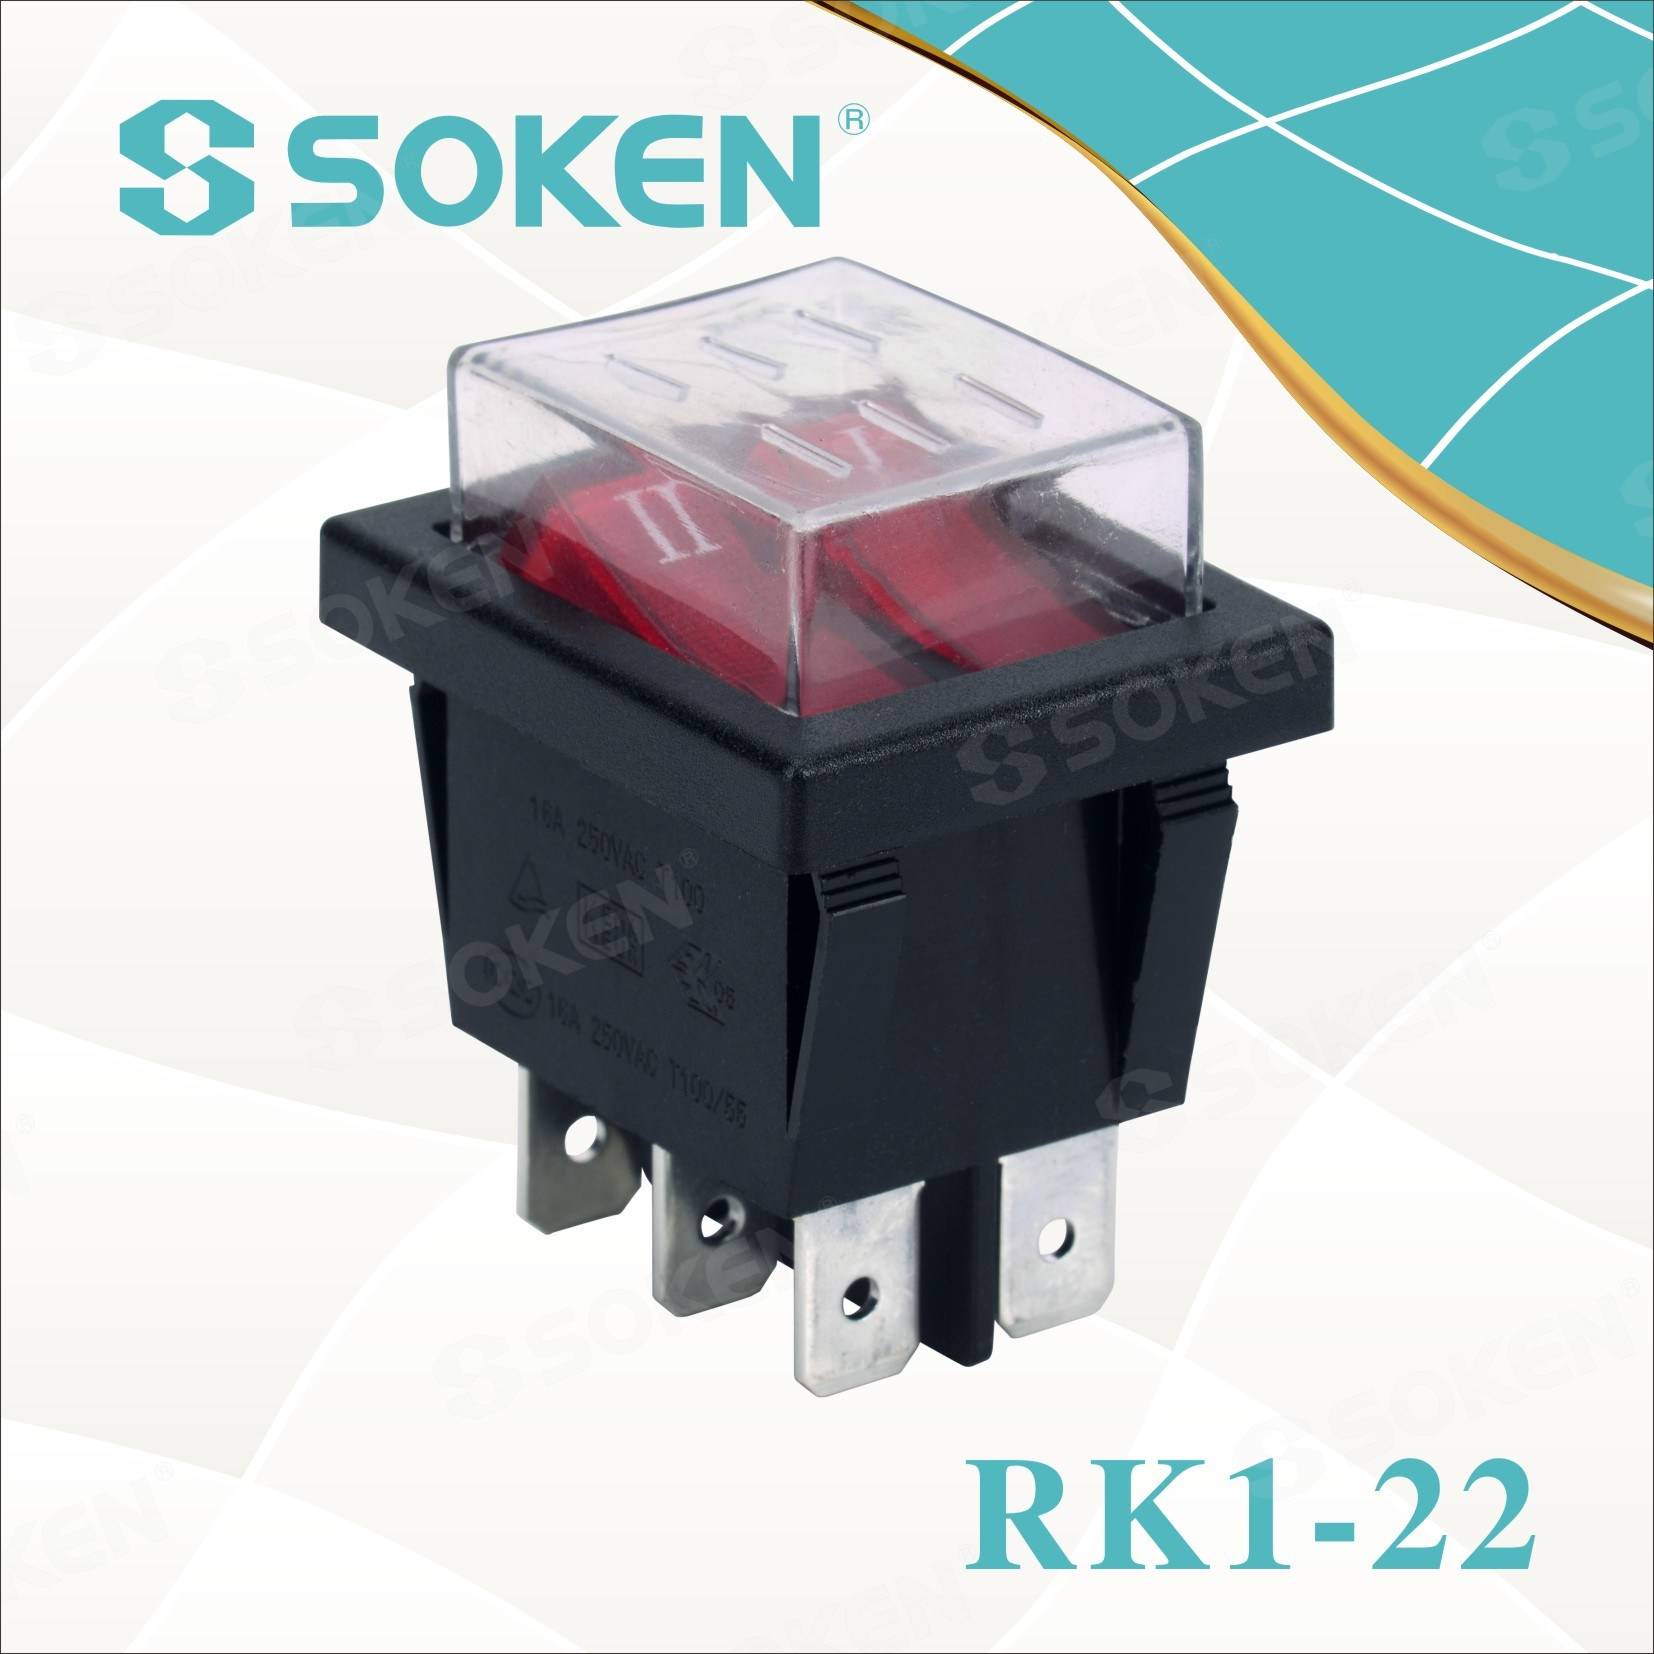 Supply OEM/ODM Automotive Push Button Switches - Soken Rk1-22 1X1X2n on off Waterproof Illuminated Double Rocker Switch – Master Soken Electrical